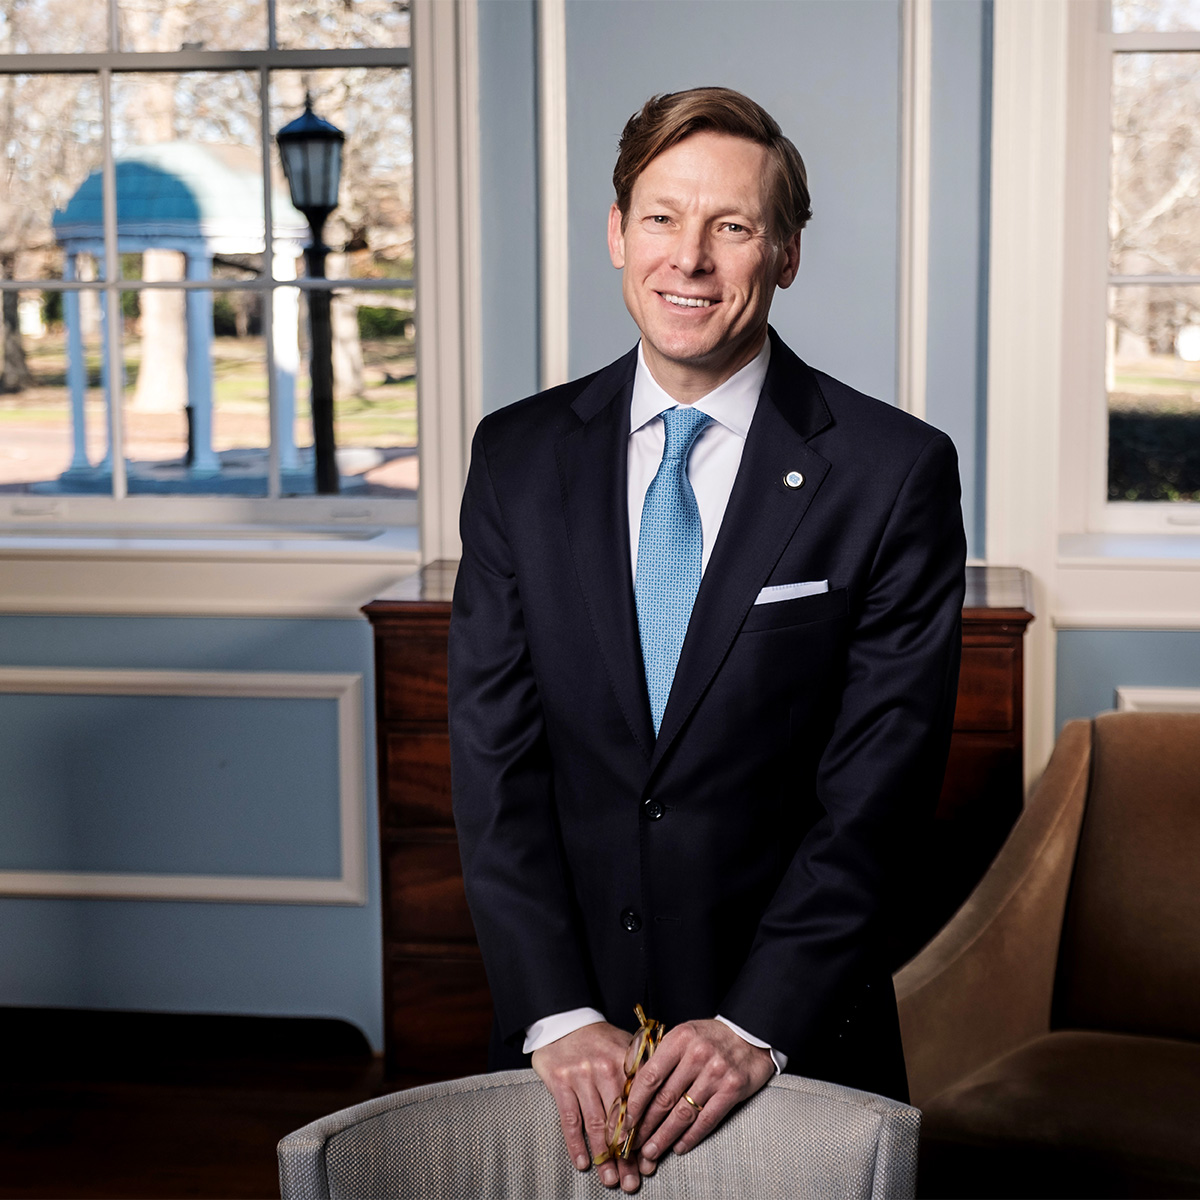 A man, UNC-Chapel Hill interim chancellor Lee H. Roberts, posing for a photo in an office in South Building with the Old Well seen through a window in the background.